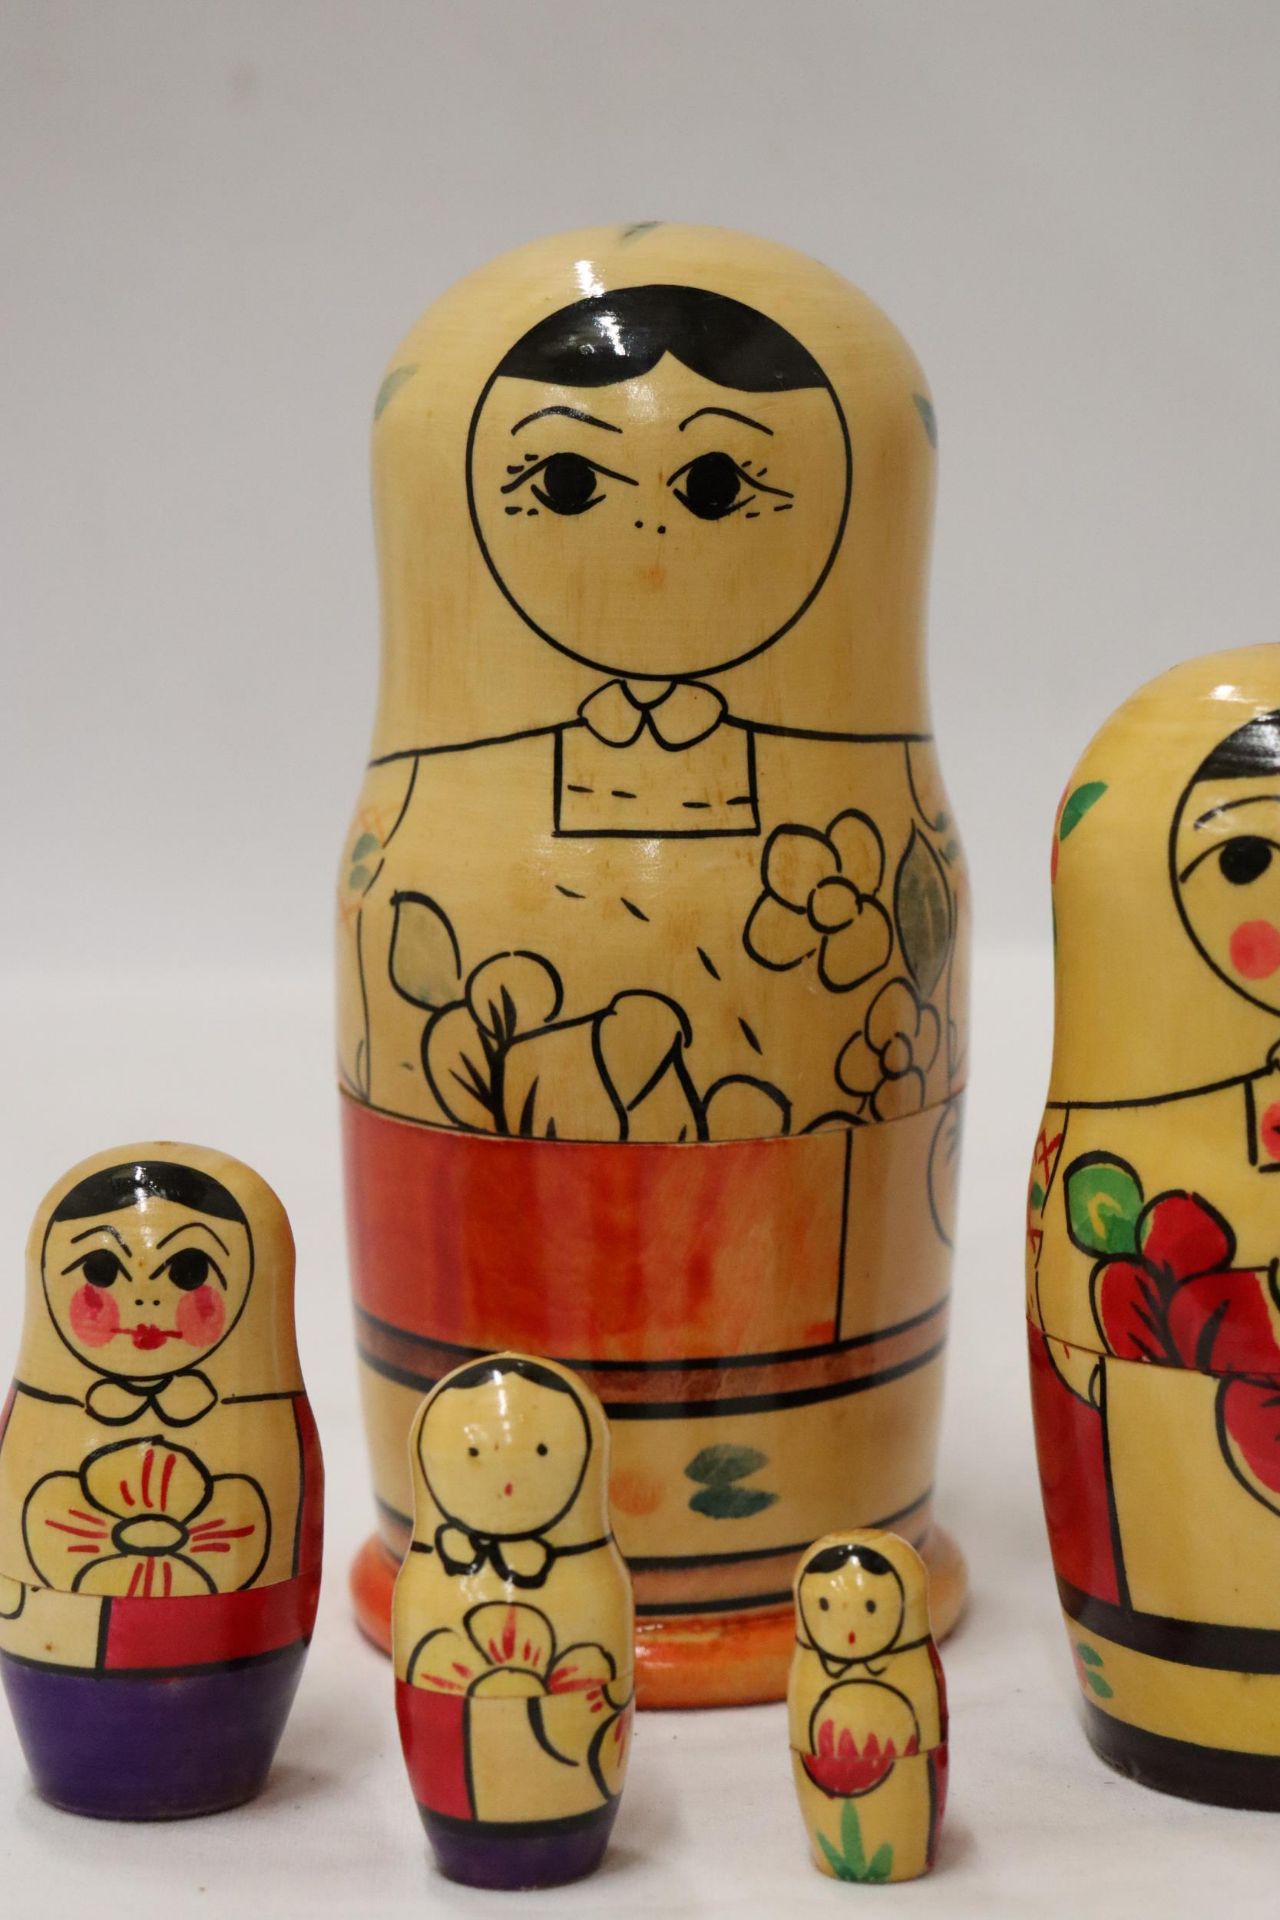 A LARGE RUSSIAN NESTING DOLL - Image 4 of 7